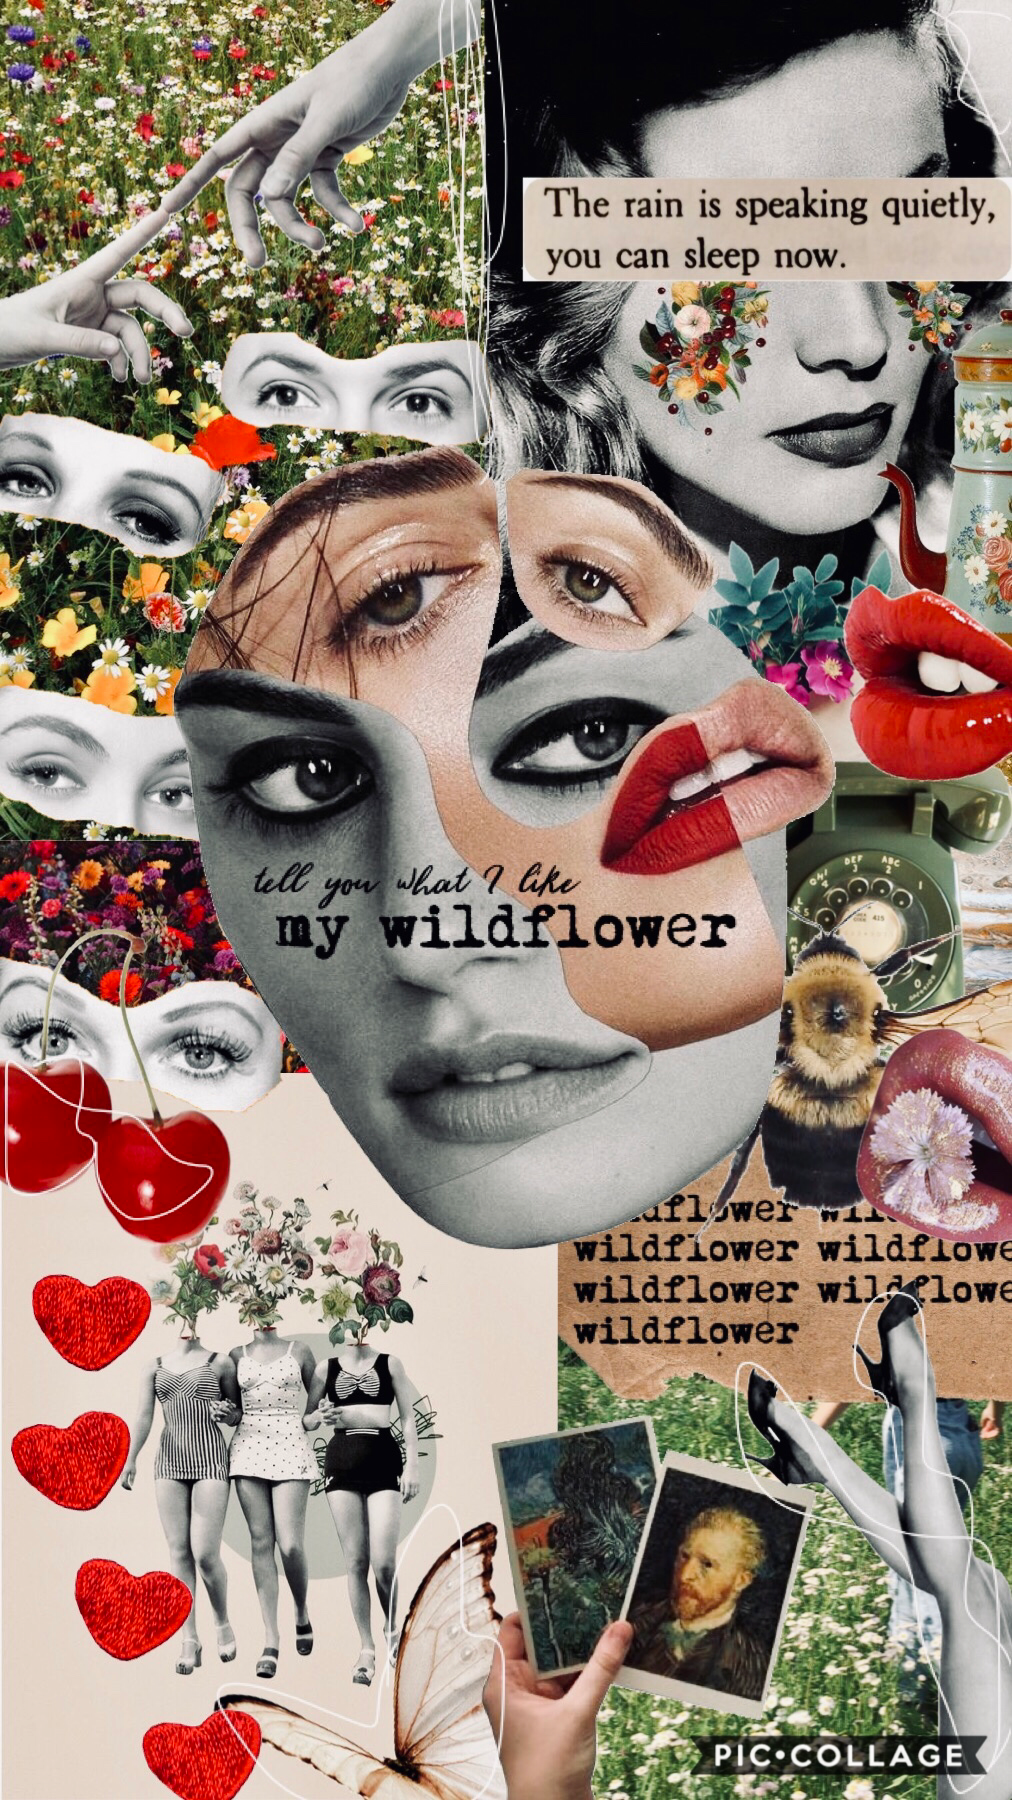 my favorite fantasy (tap) 
here’s to hoping this does well 😎👊 I’ve been experimenting with my style so lmk what you think of this! (the song is wildflower by 5sos)